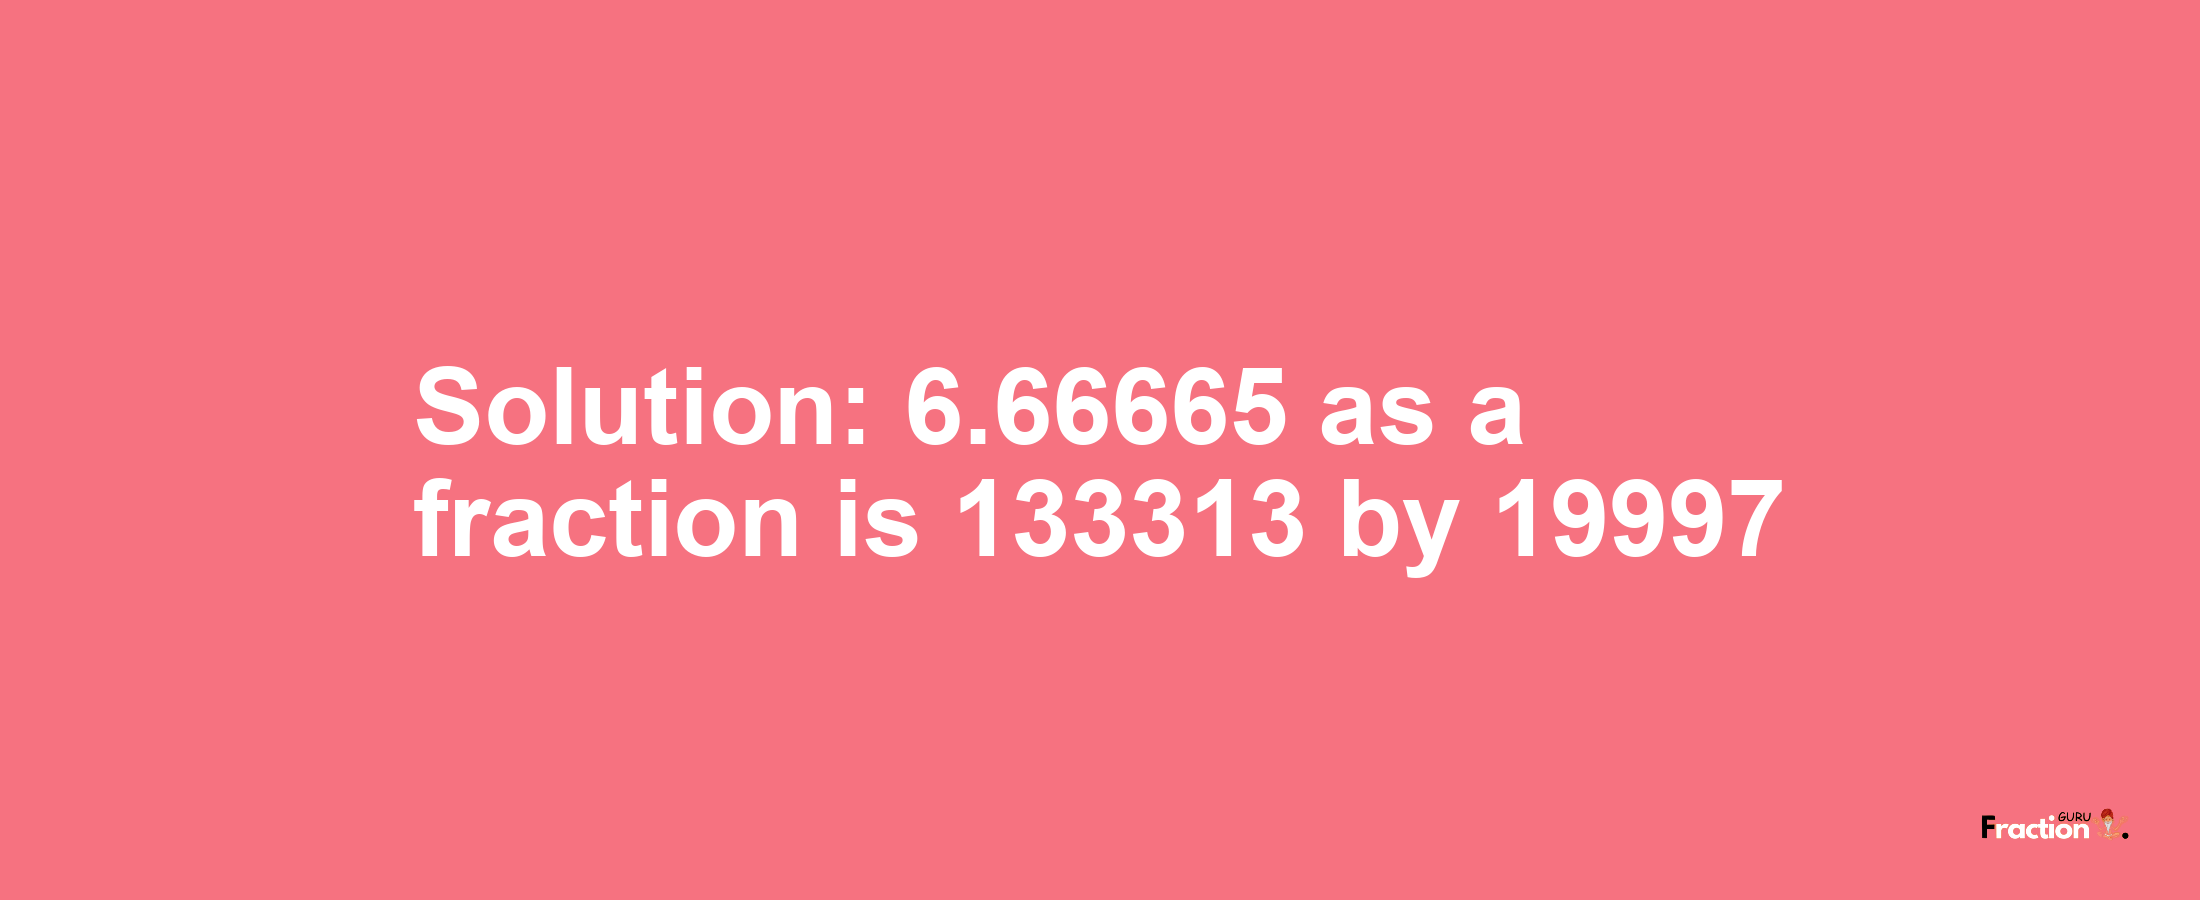 Solution:6.66665 as a fraction is 133313/19997